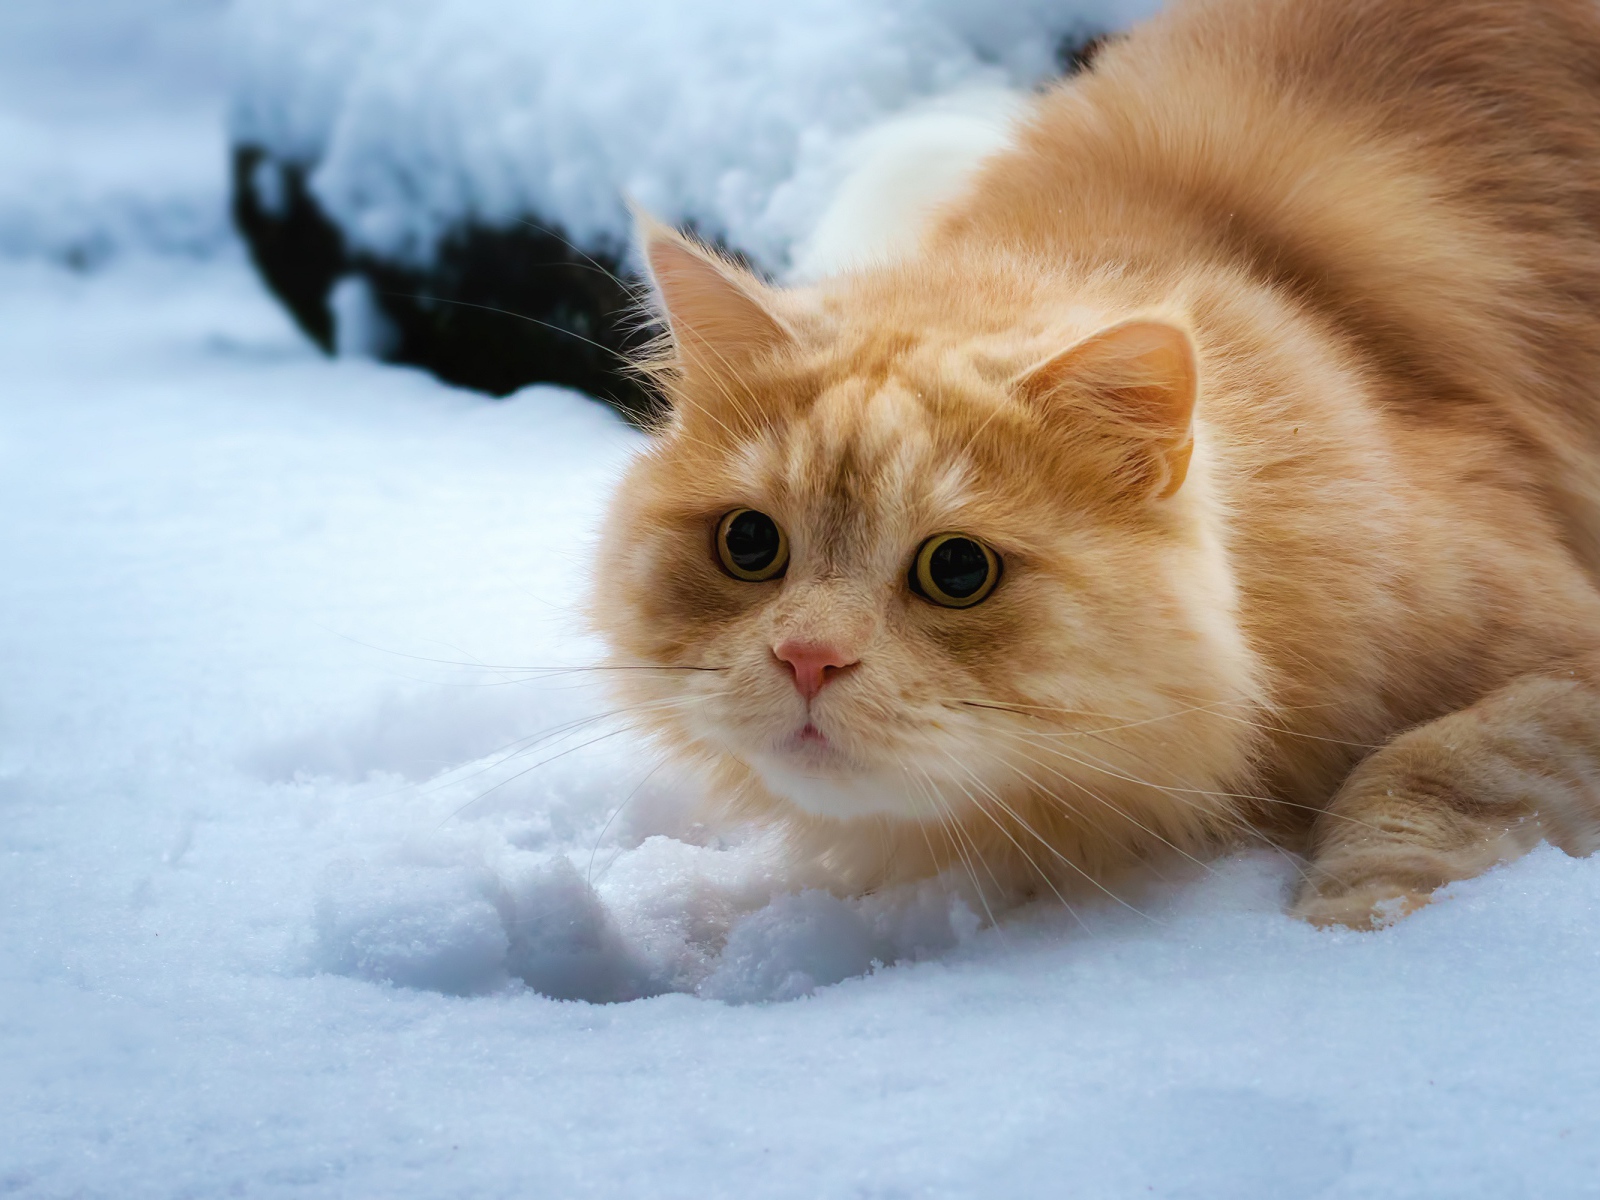 Furry red cat lies on the snow